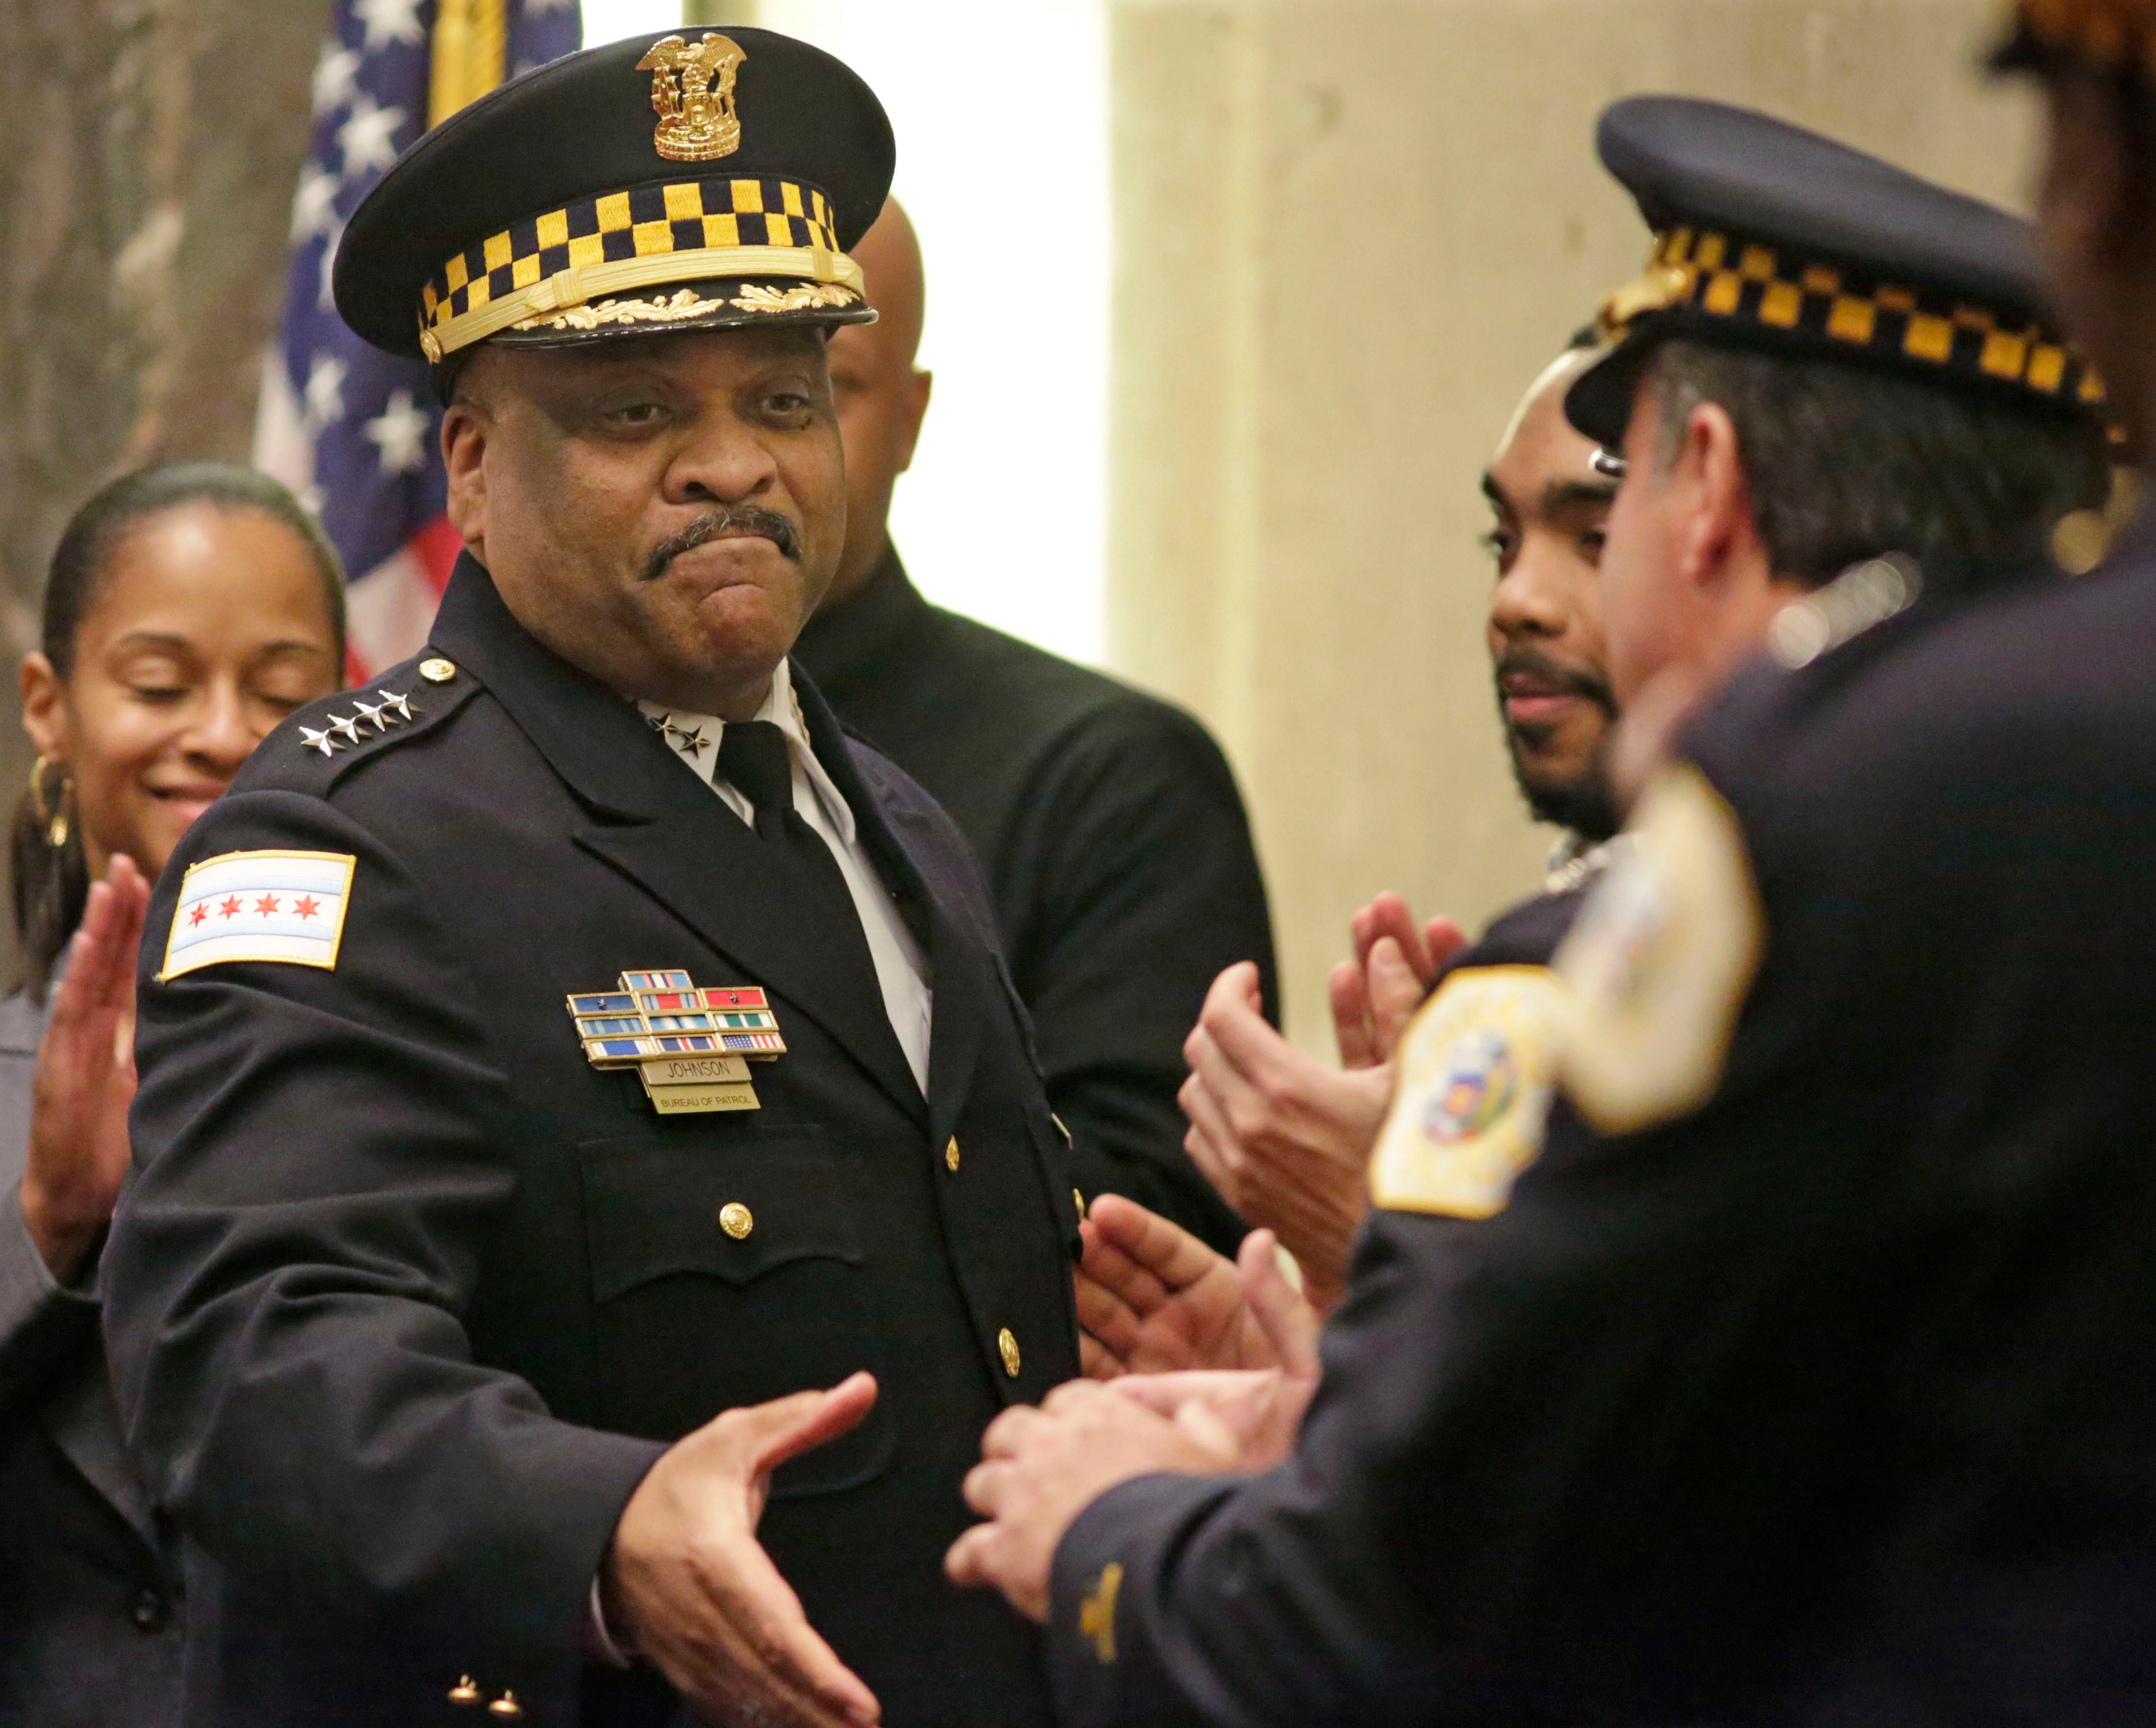 Will This Help? Chicago To Hire 1,000 Cops To Combat Violence 